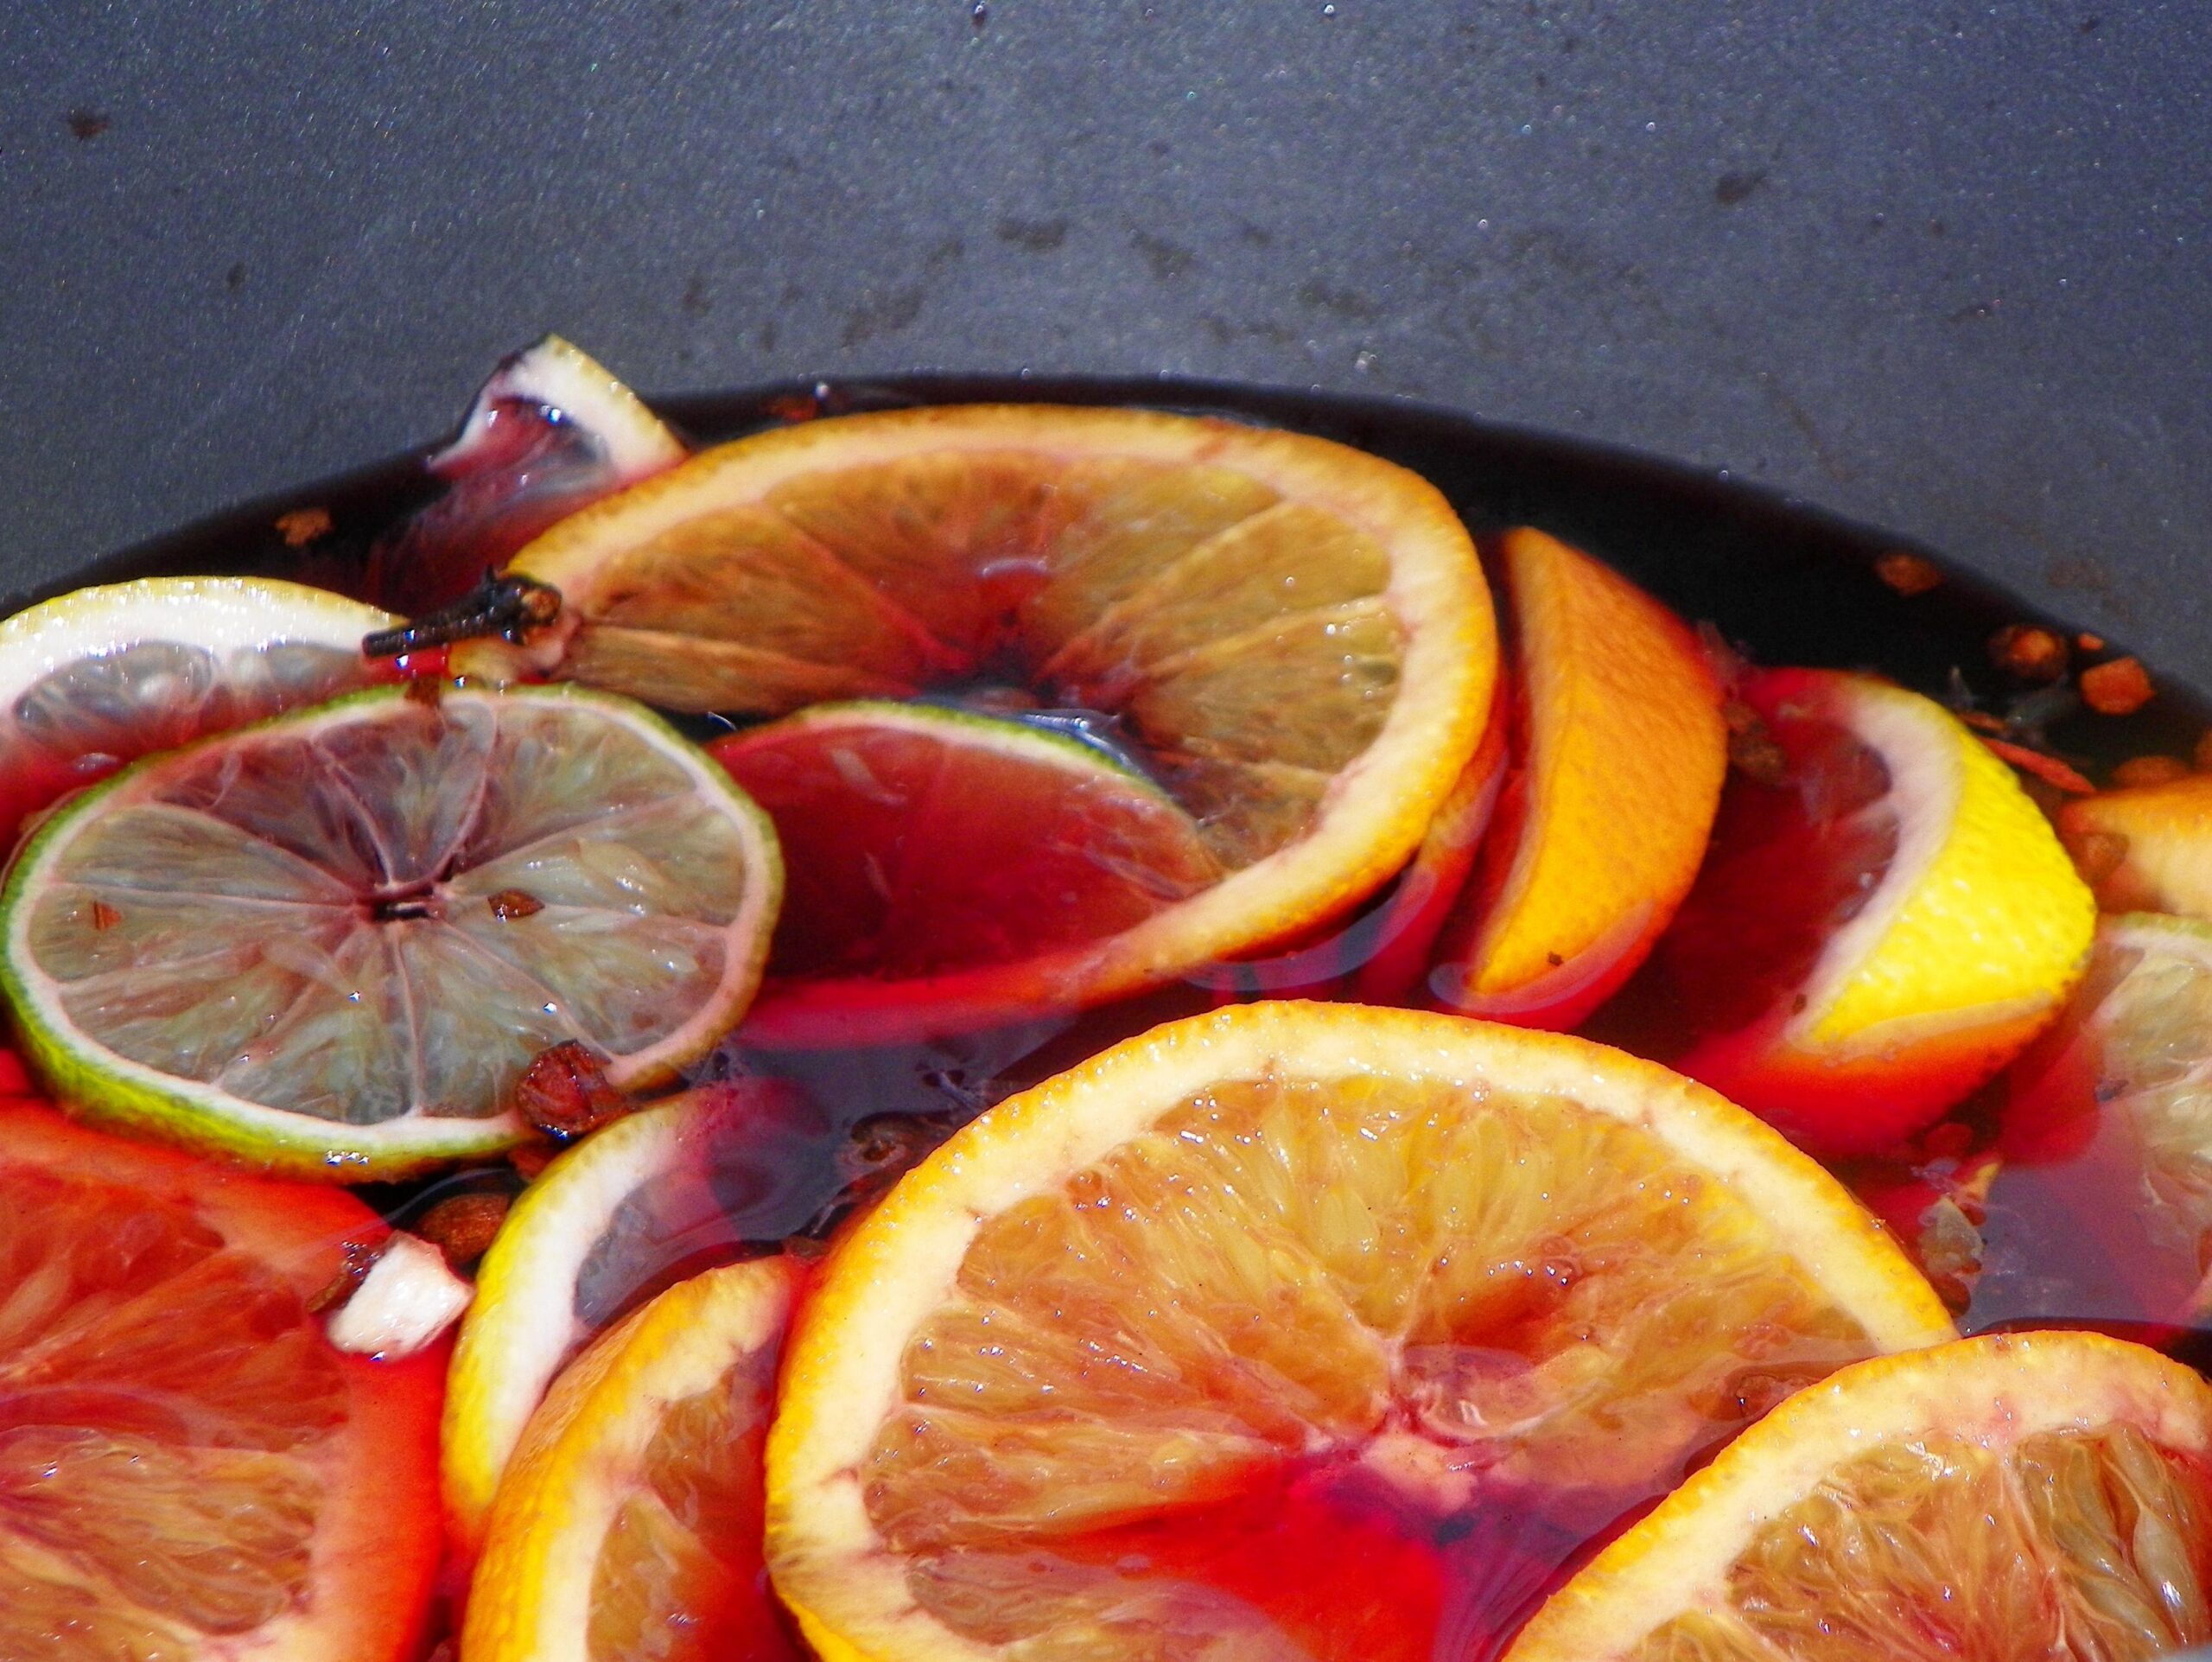  The aroma of cinnamon delights the senses in this hot spiced wine recipe.